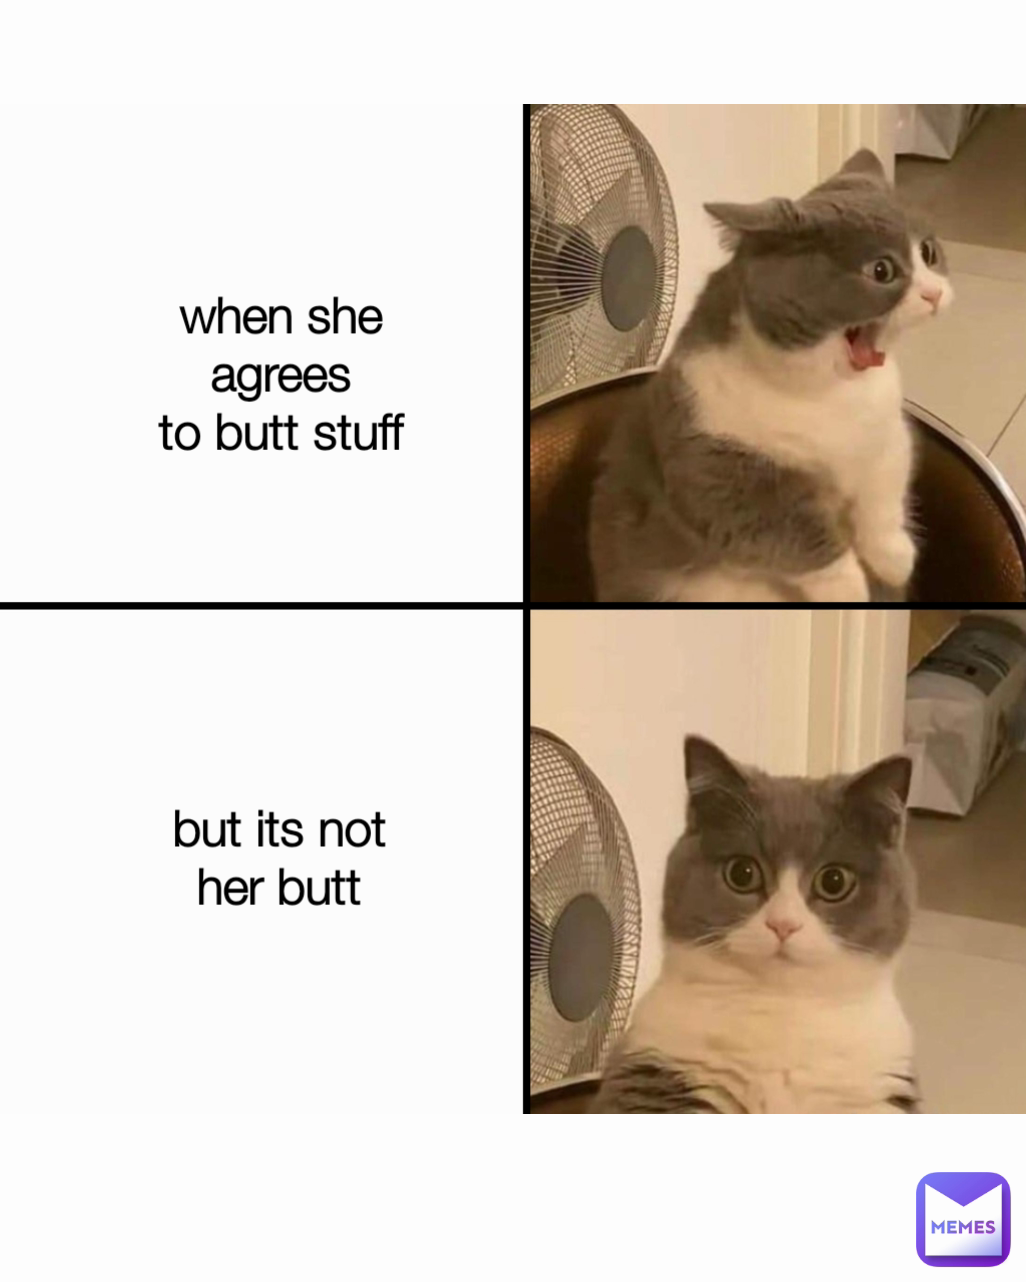 but its not
her butt when she agrees
to butt stuff